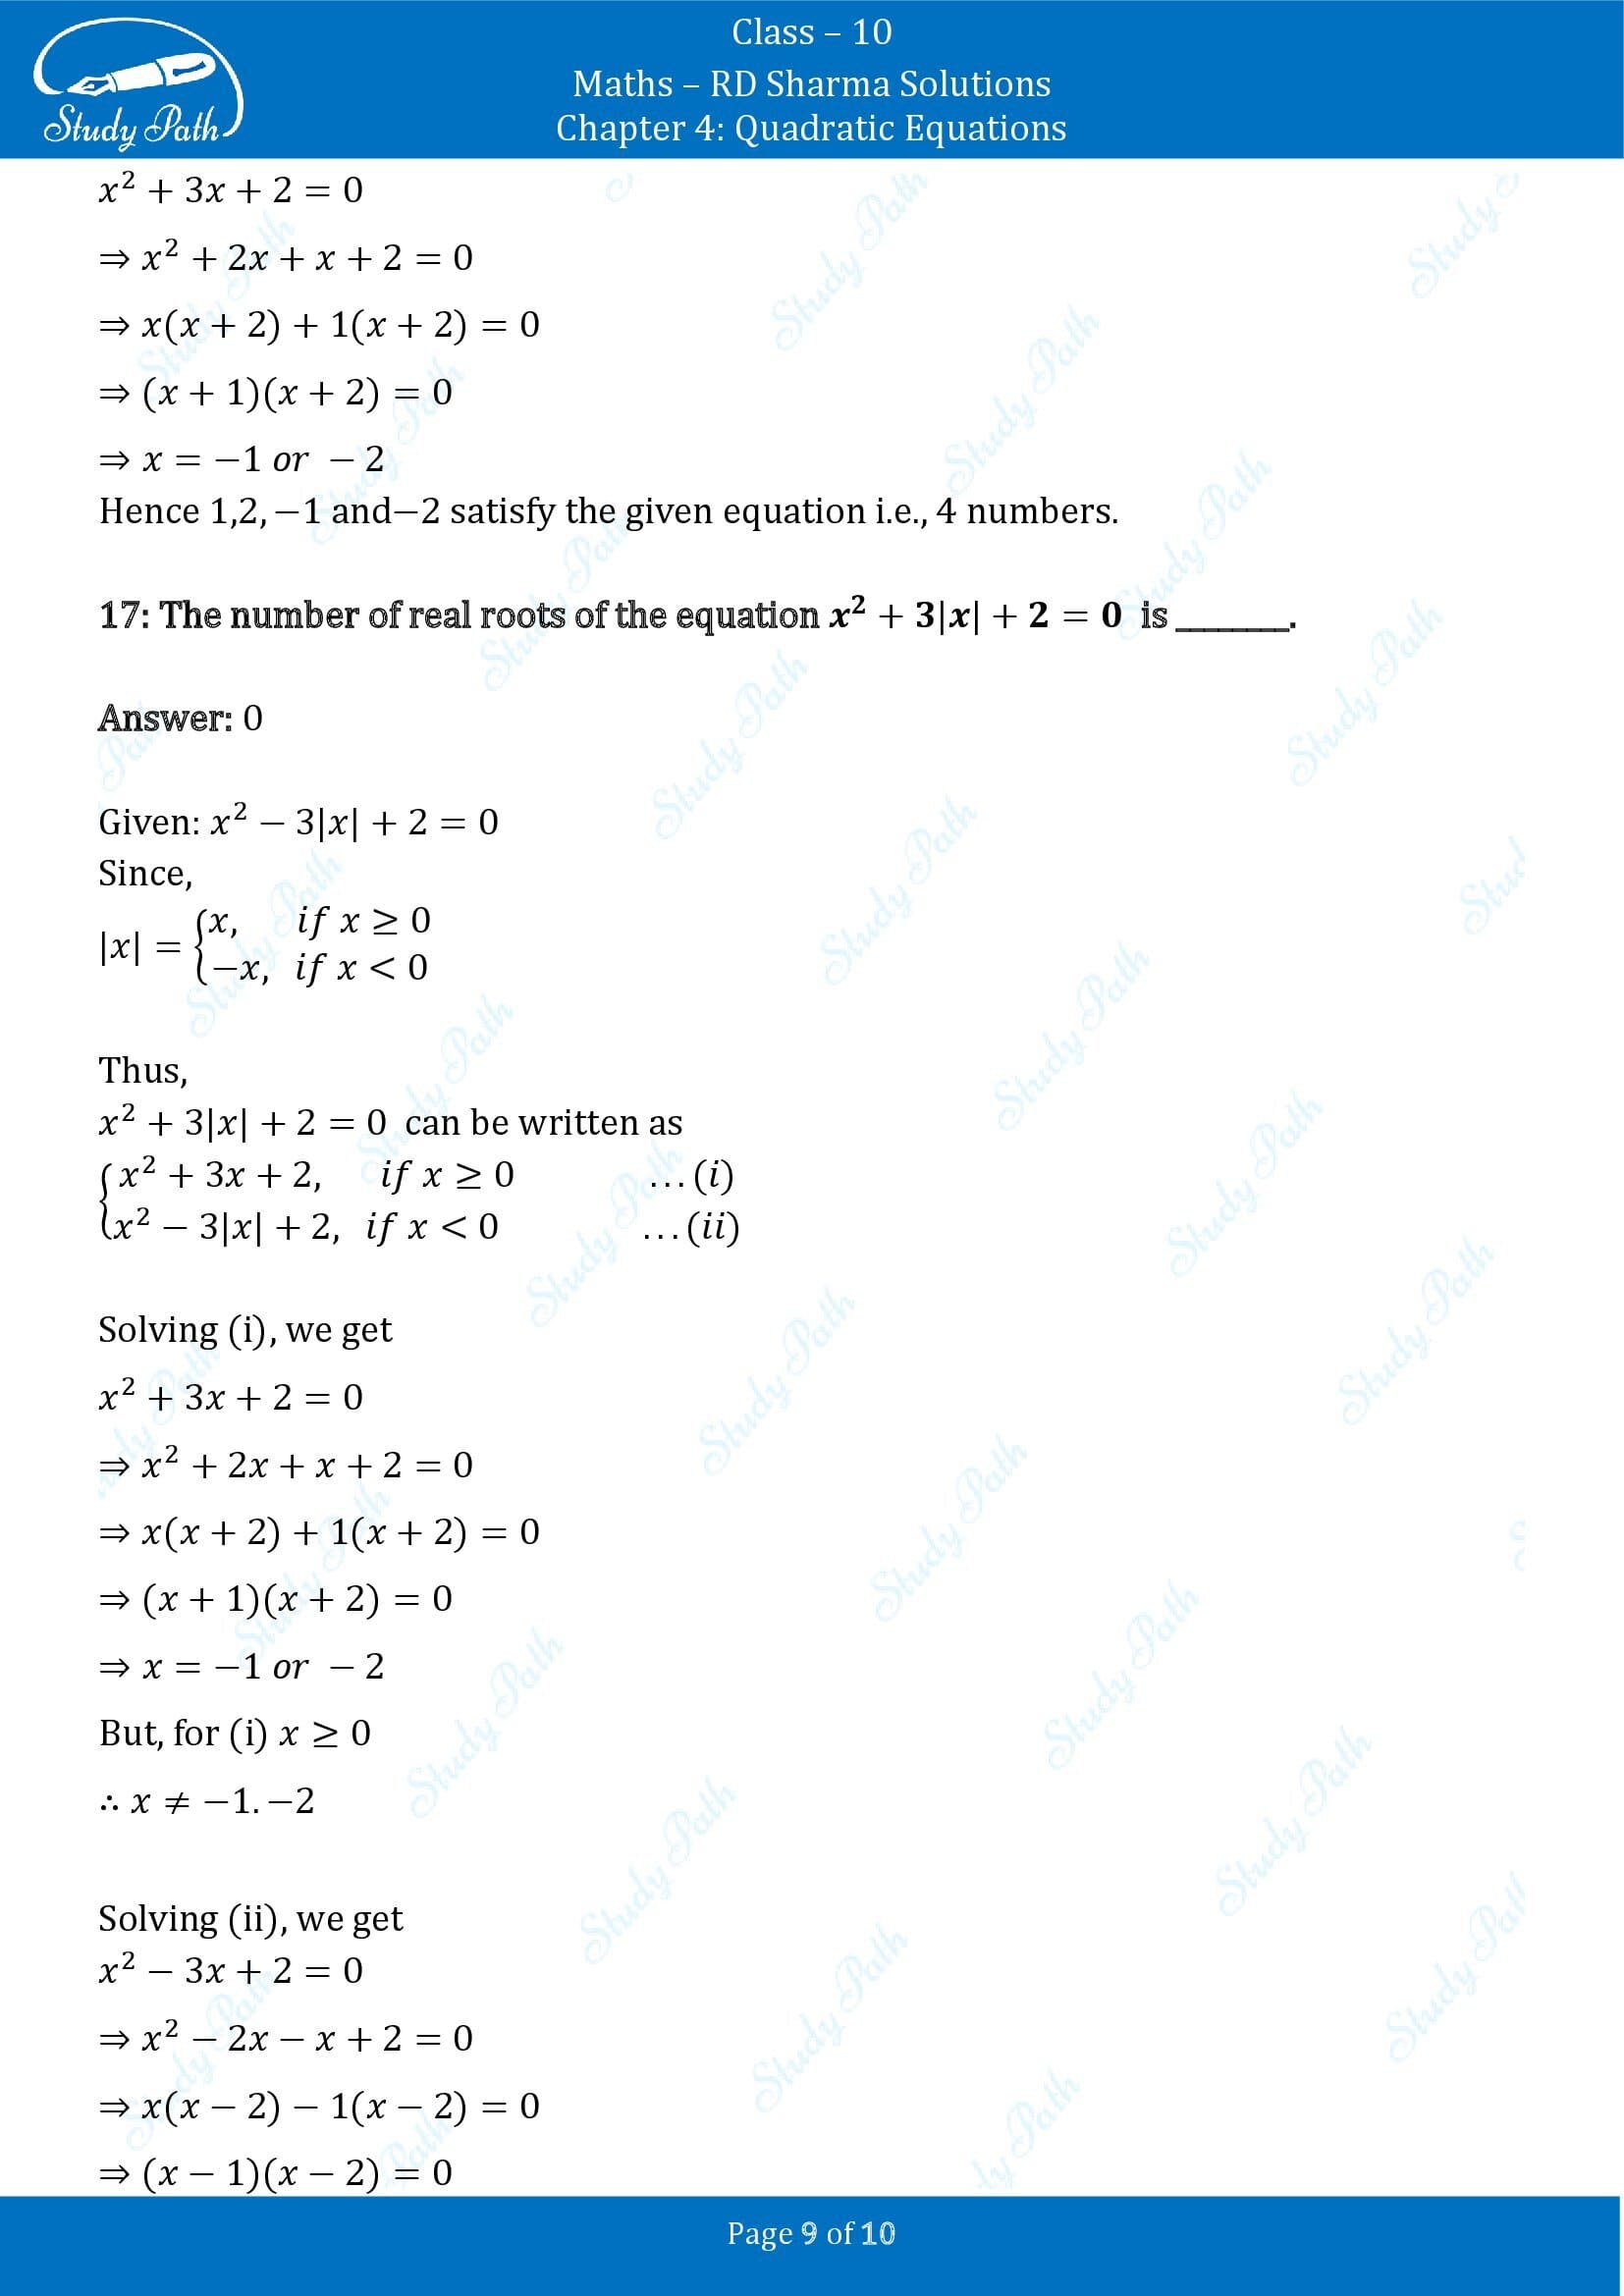 RD Sharma Solutions Class 10 Chapter 4 Quadratic Equations Fill in the Blank Type Questions FBQs 00009